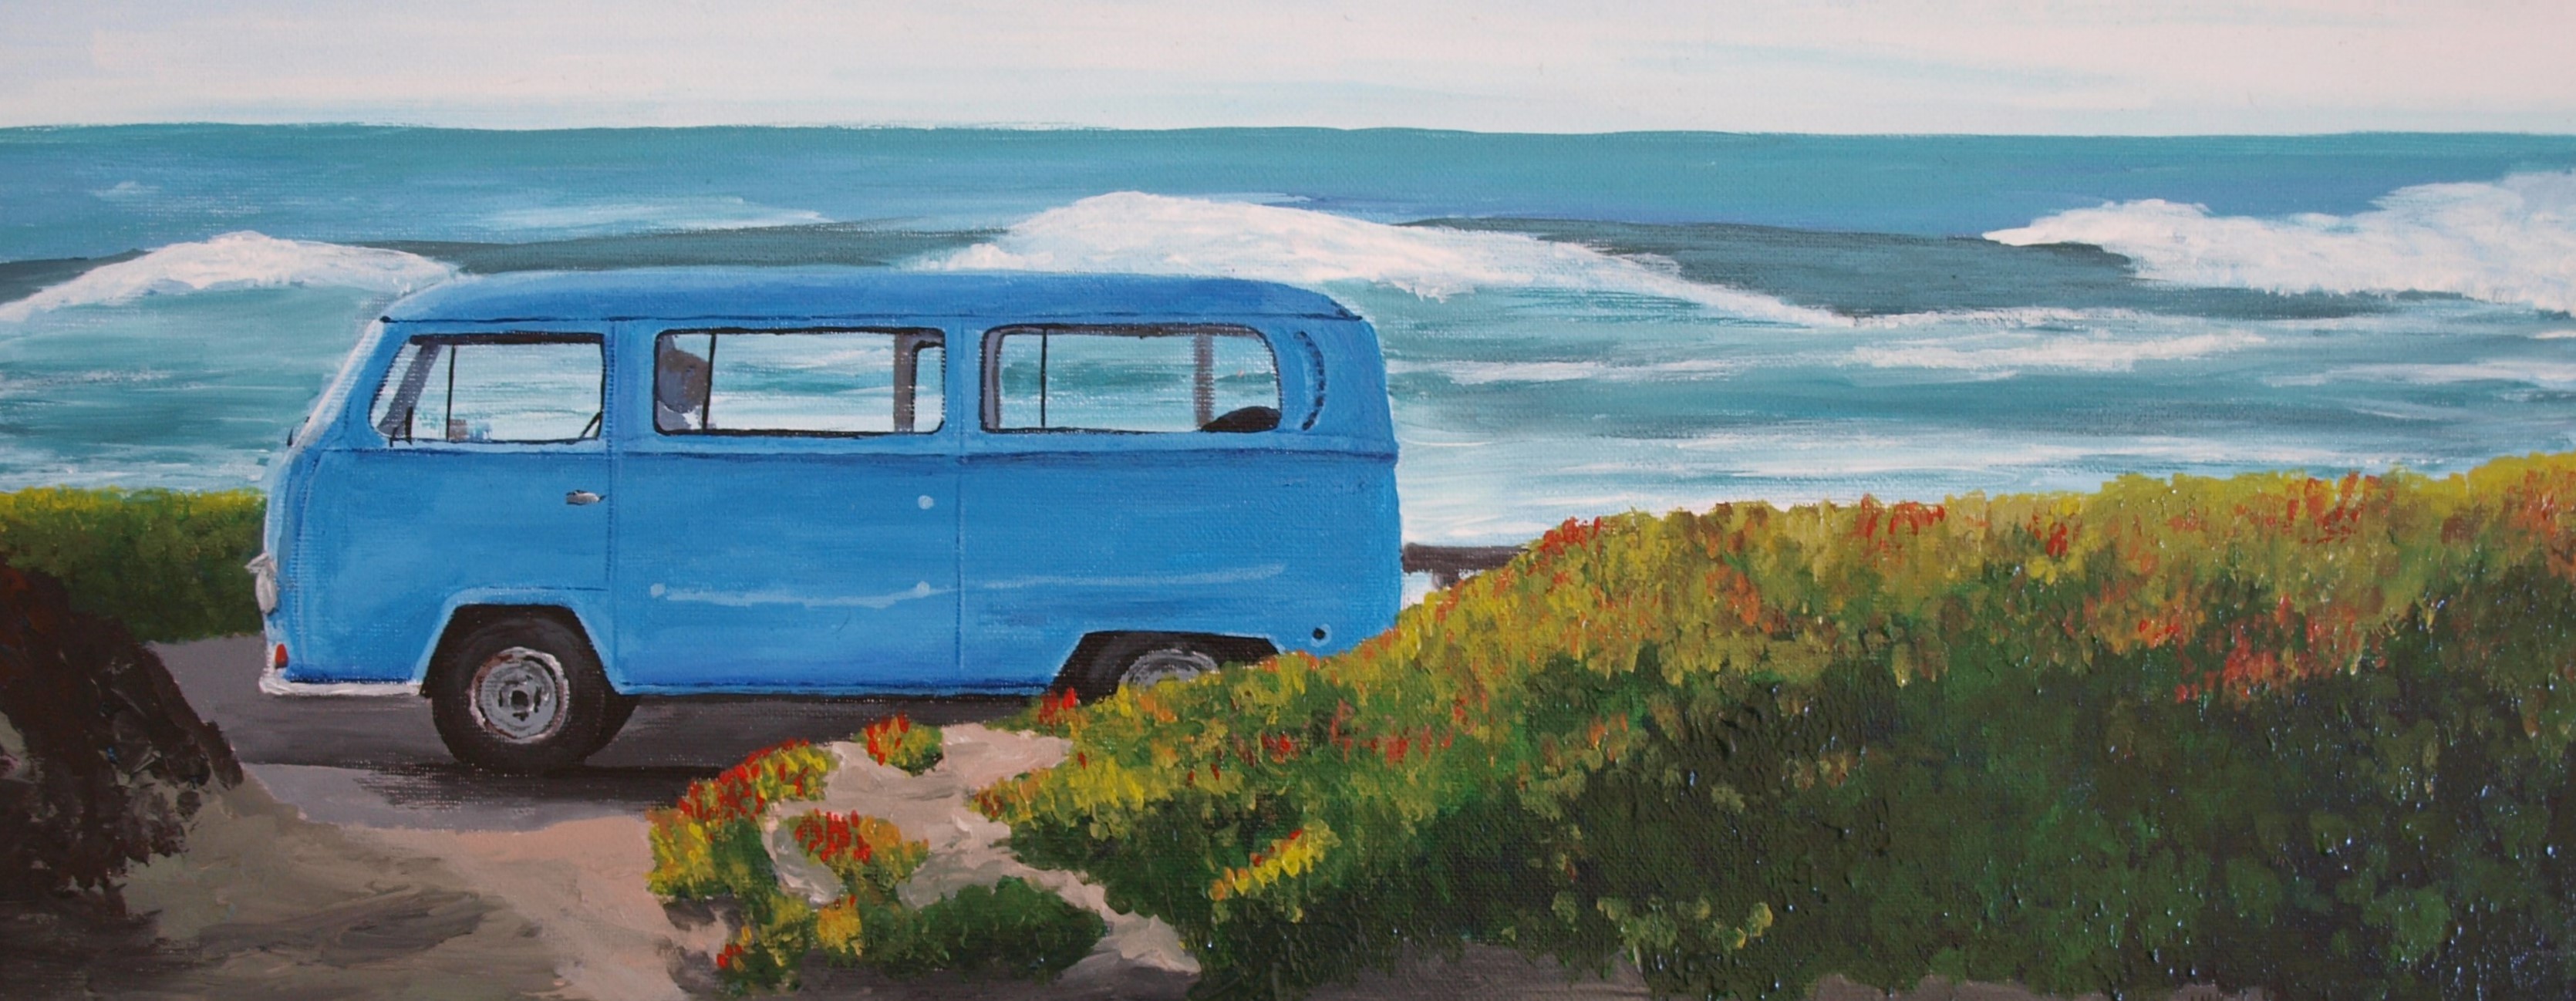 VW bay window campervan by the sea acrylic painting by Louisa Hill